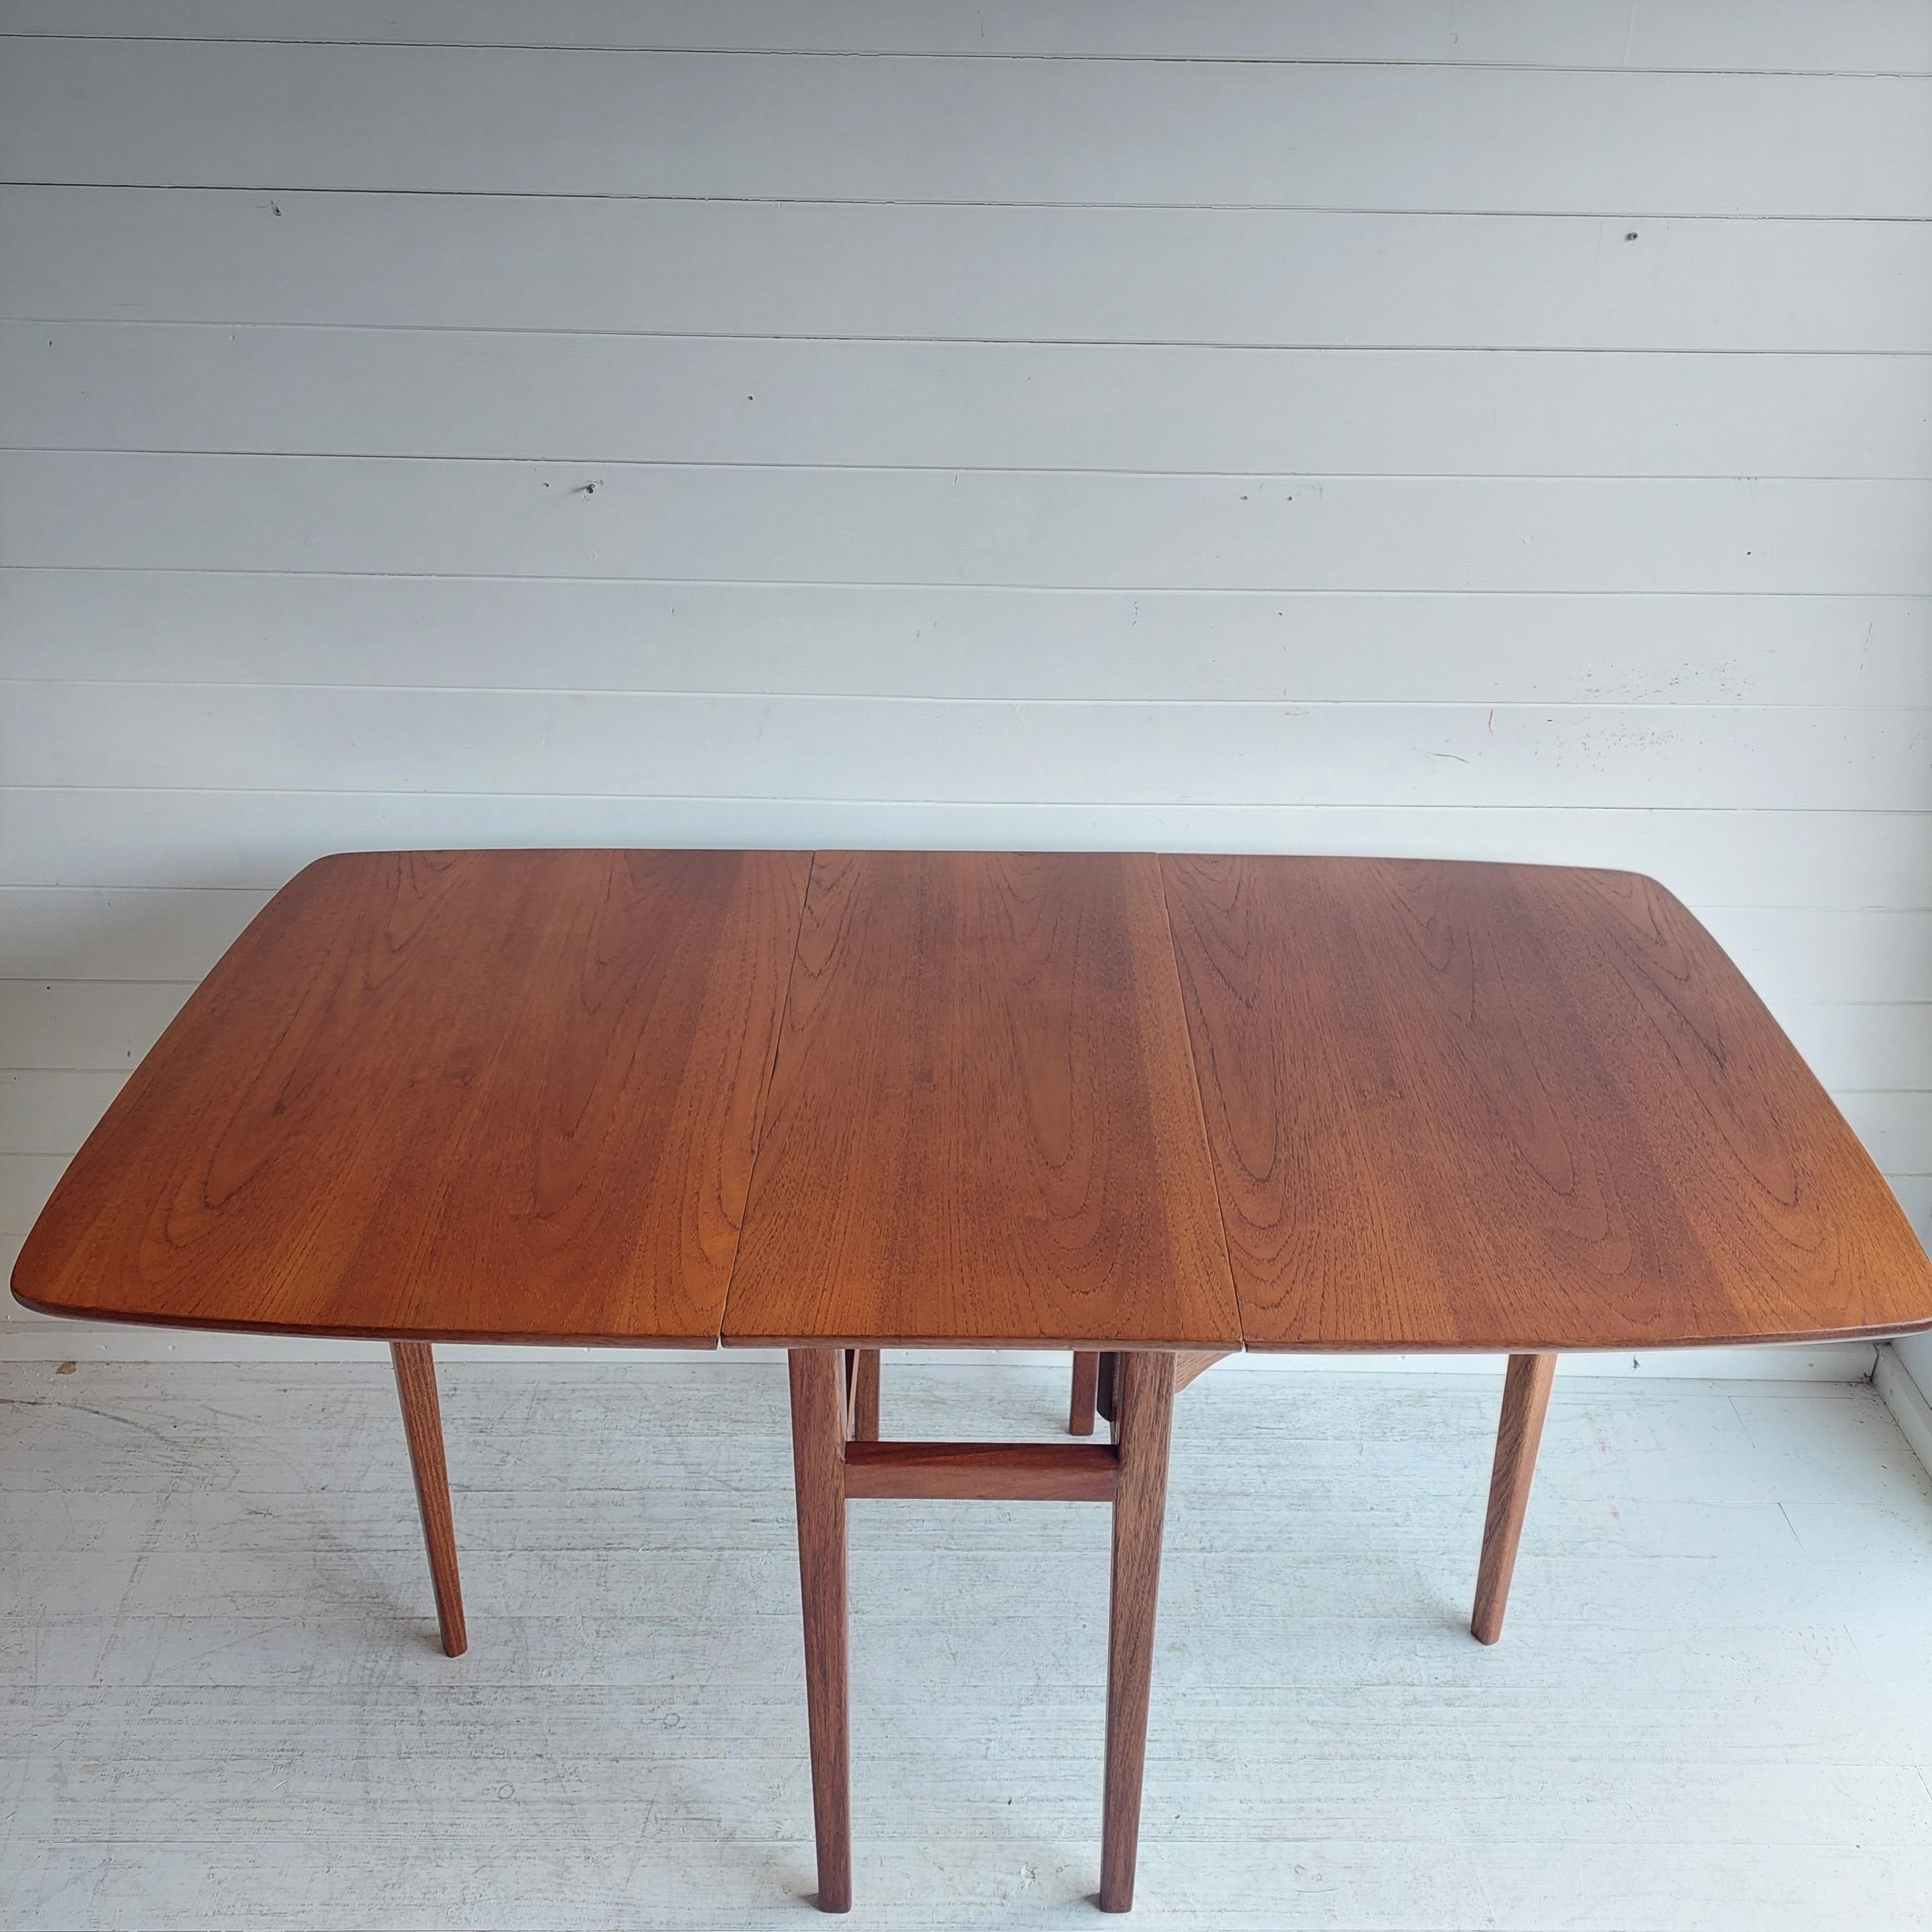 Mid Century Danish influenced Teak extendable dining table from the 70s

Fantastic teak dining table with extending leaves at each end.
A very sleek and practical design, the leaves can be placed up by using the legs to hold it in place to create a